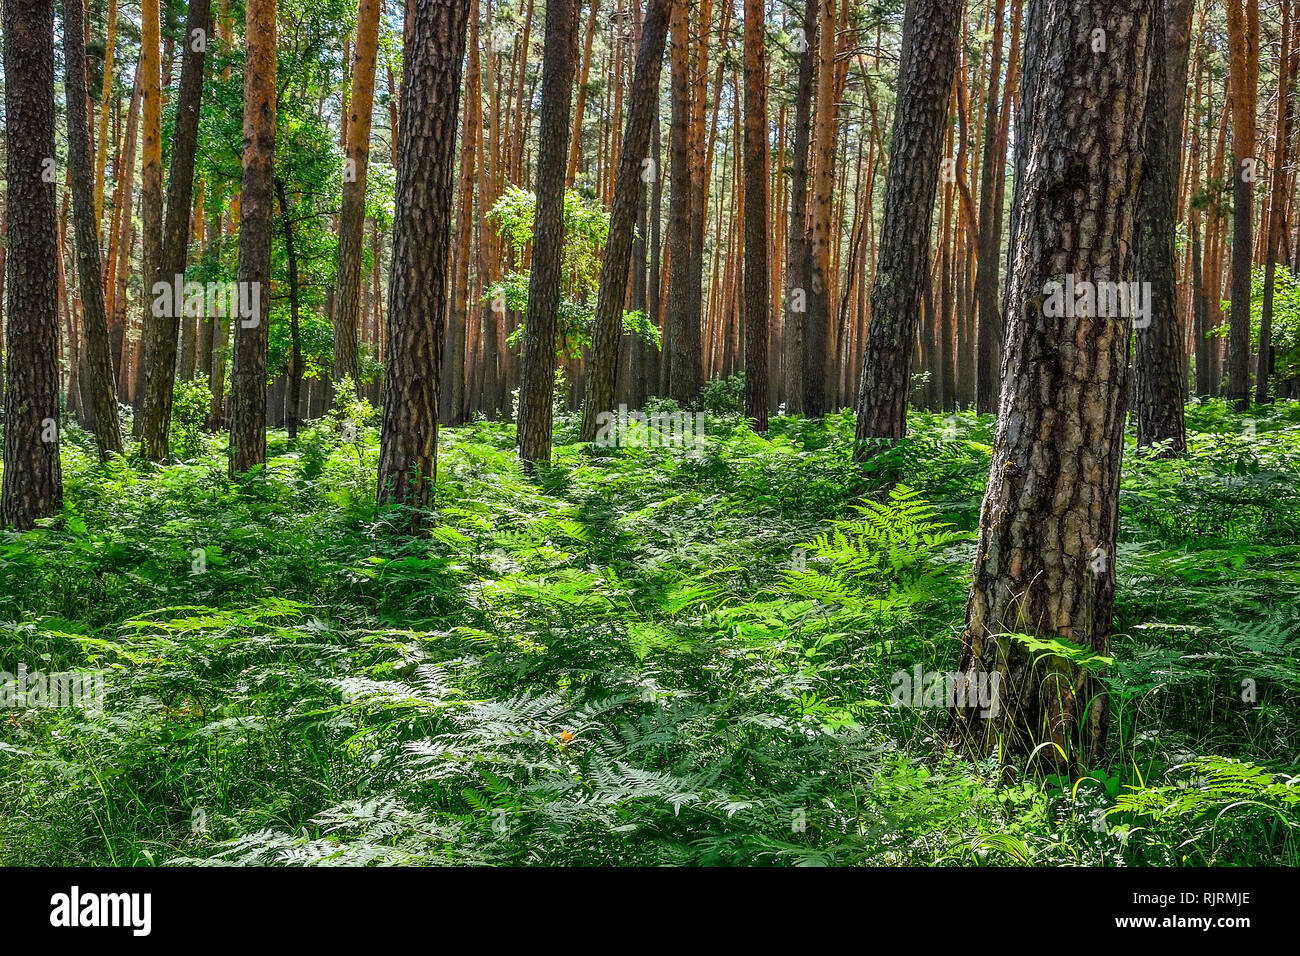 Beautiful summer sunny landscape in pine forest with tall slender trunks of coniferous trees, fresh pure air and green ferns on the ground. Majestic n Stock Photo